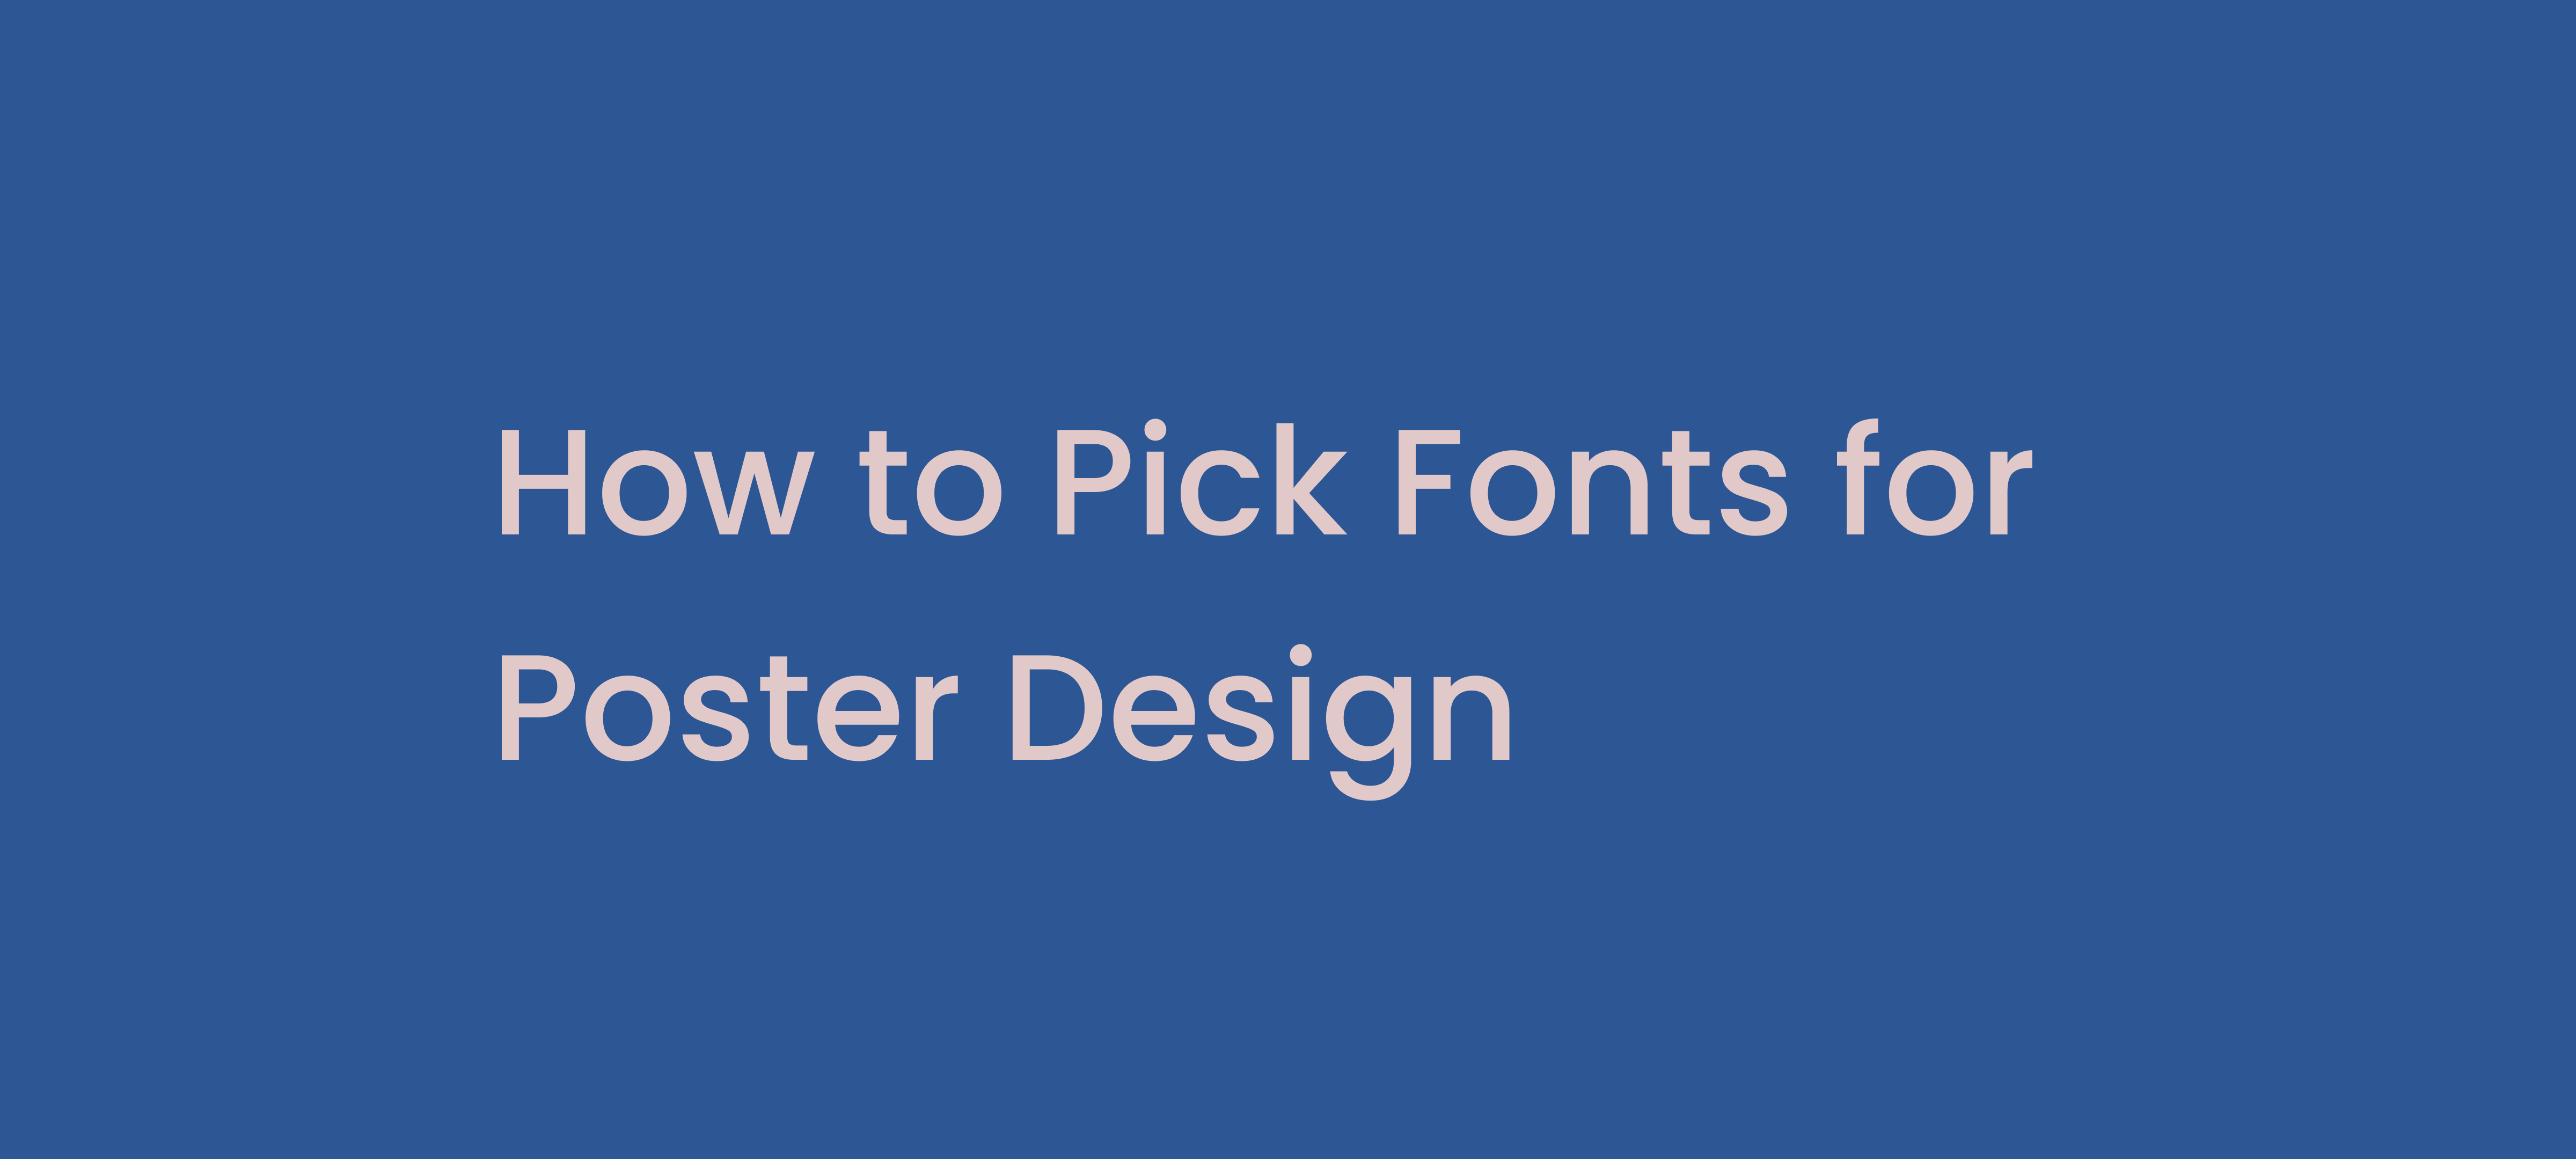 How to pick fonts for poster design